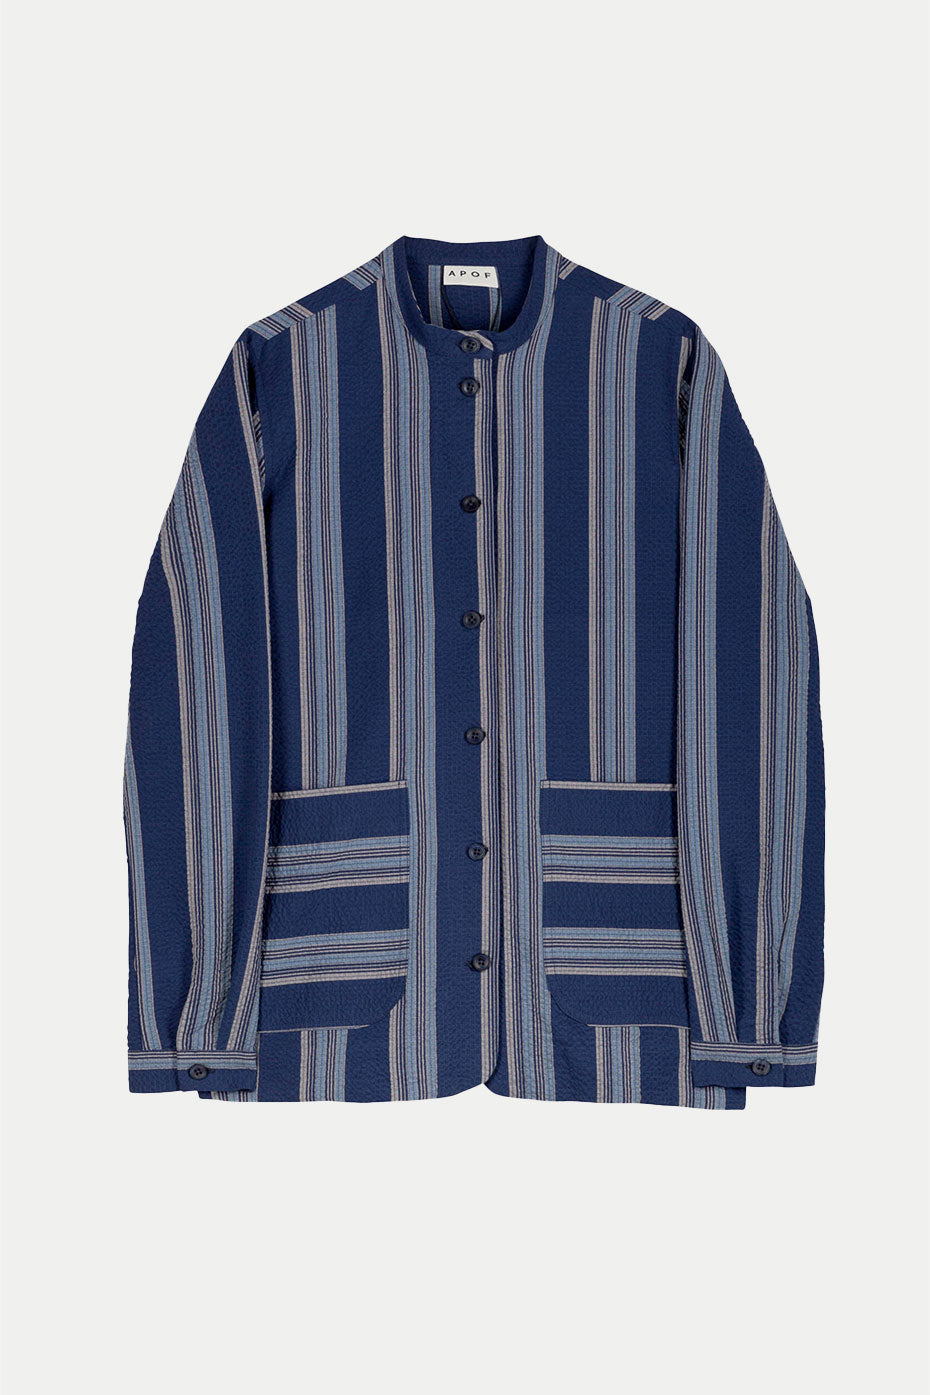 APOF Structured Stripe Delores Jacket